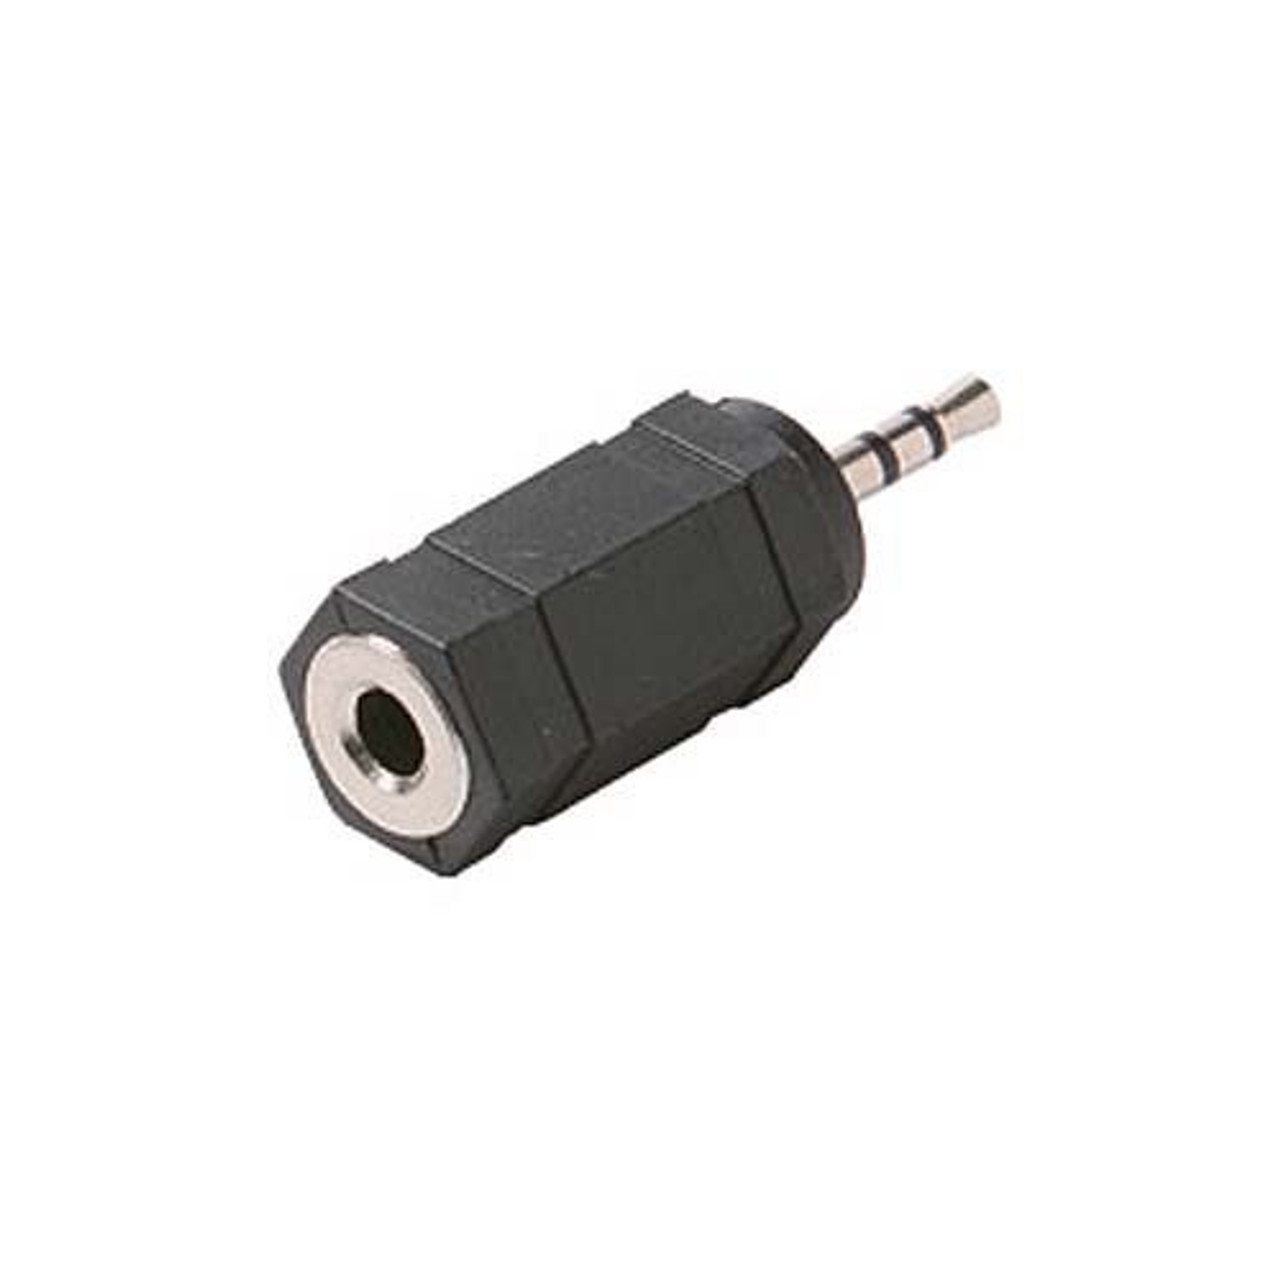 Steren 251-002-10 2.5mm Male to 3.5mm Female Adapter Stereo 10 Pack Lot 3.5 mm Female to 2.5 mm Male Stereo Headphone Audio Jack Signal MP3 Plug Connector, Part # 251002-10